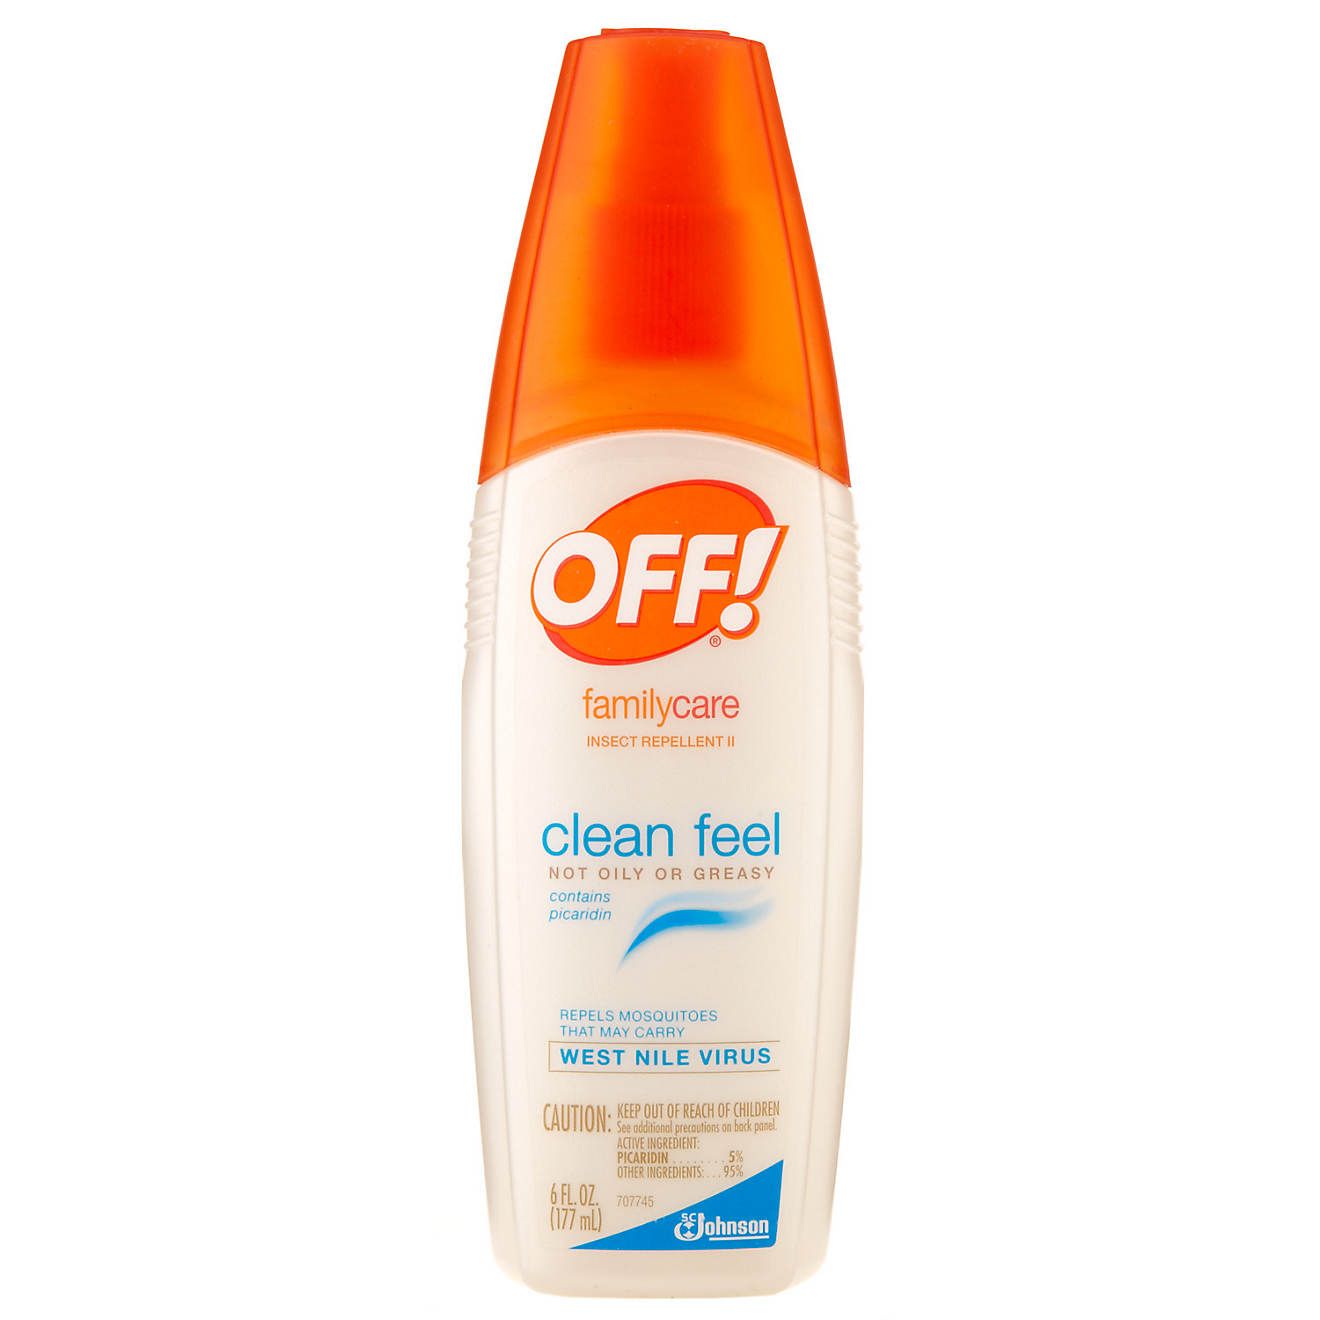 OFF! FamilyCare Clean Feel Insect Repellent | Academy Sports + Outdoor Affiliate